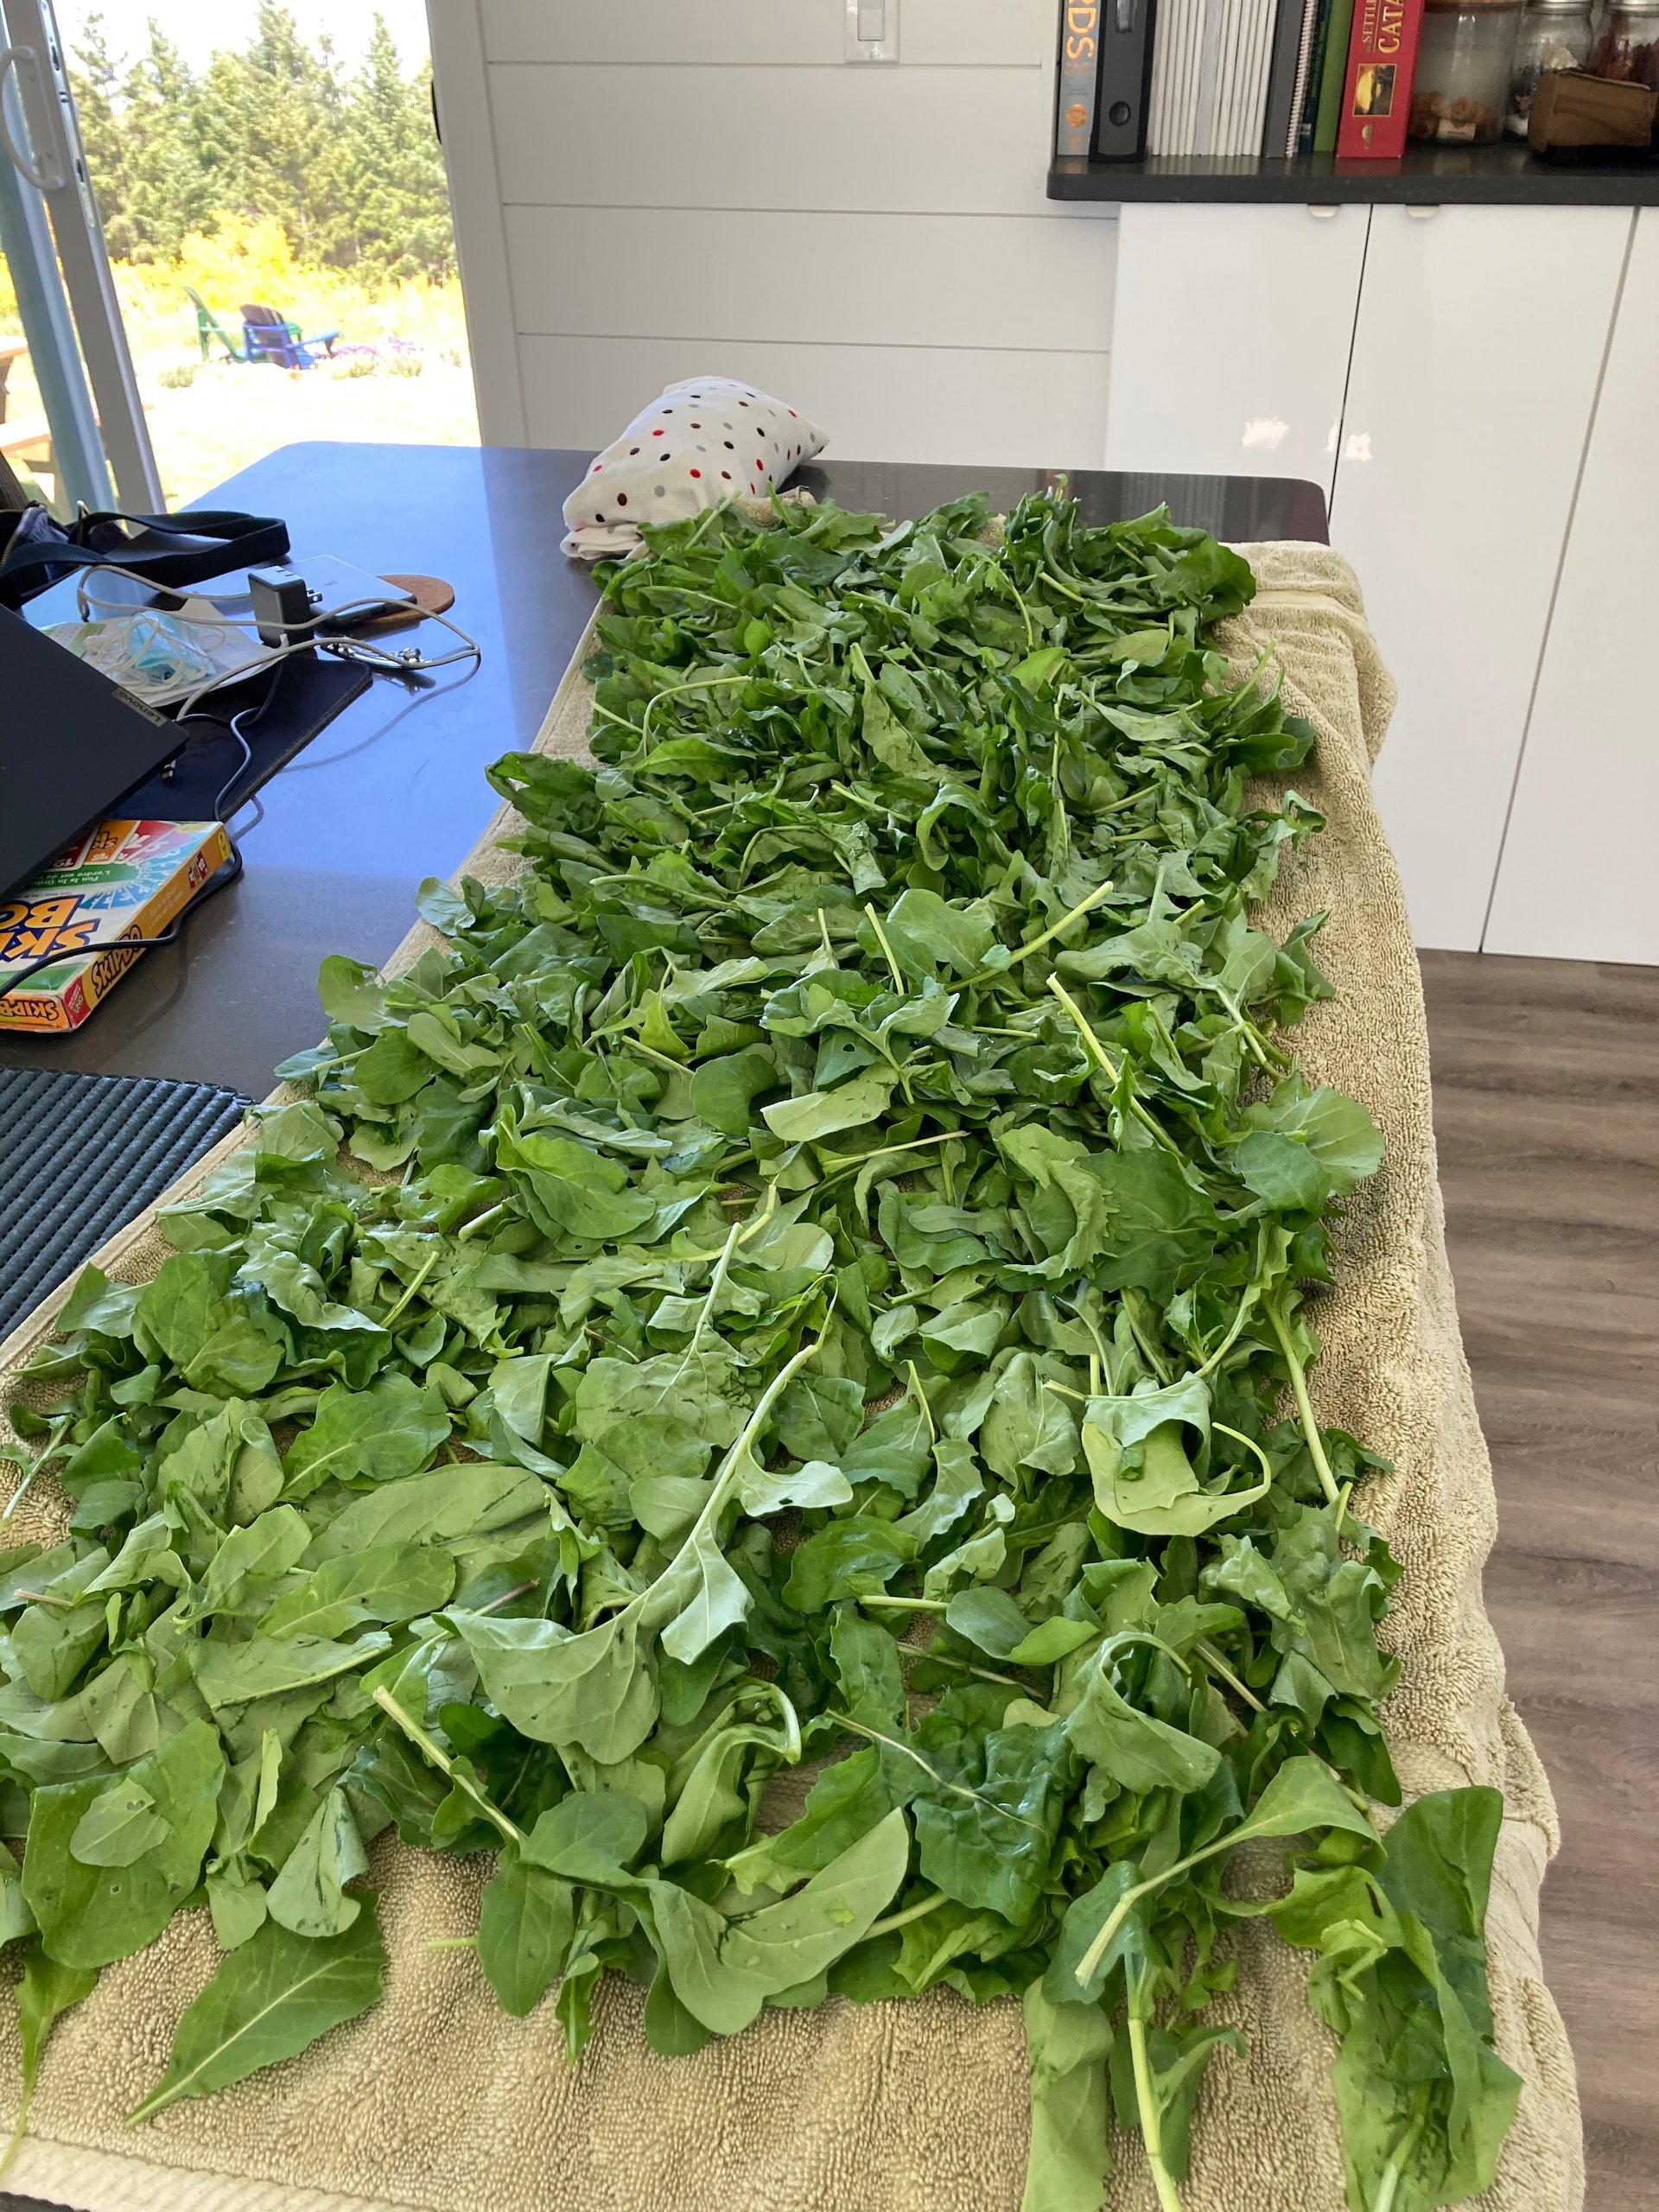  We harvested some arugula - more than we’ll be able to eat so we donated some to the local food bank. 